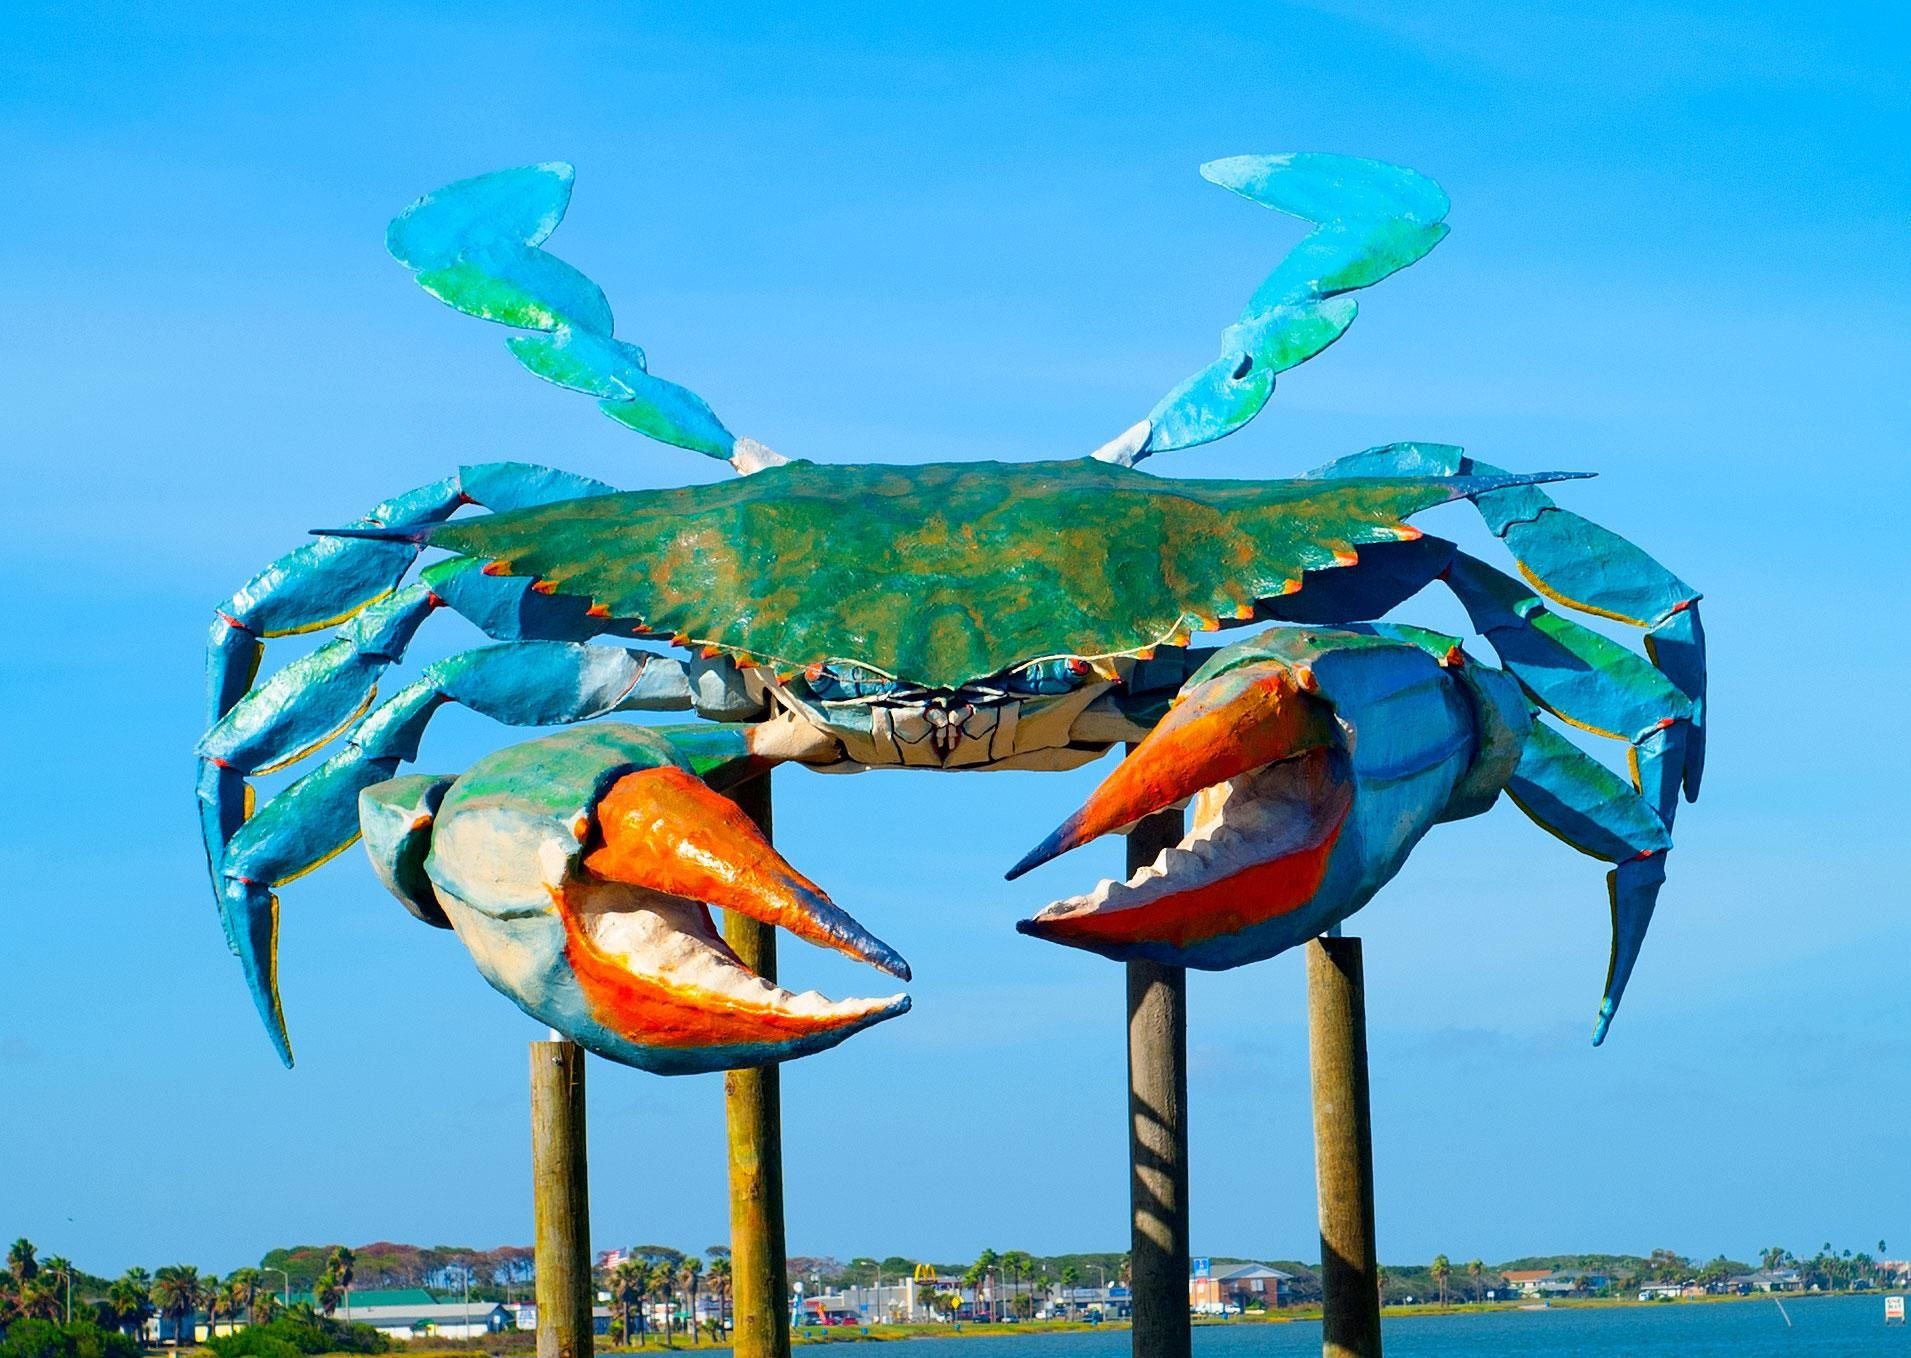 World’s Largest Blue Crab: Rockport, Texas, sets world record